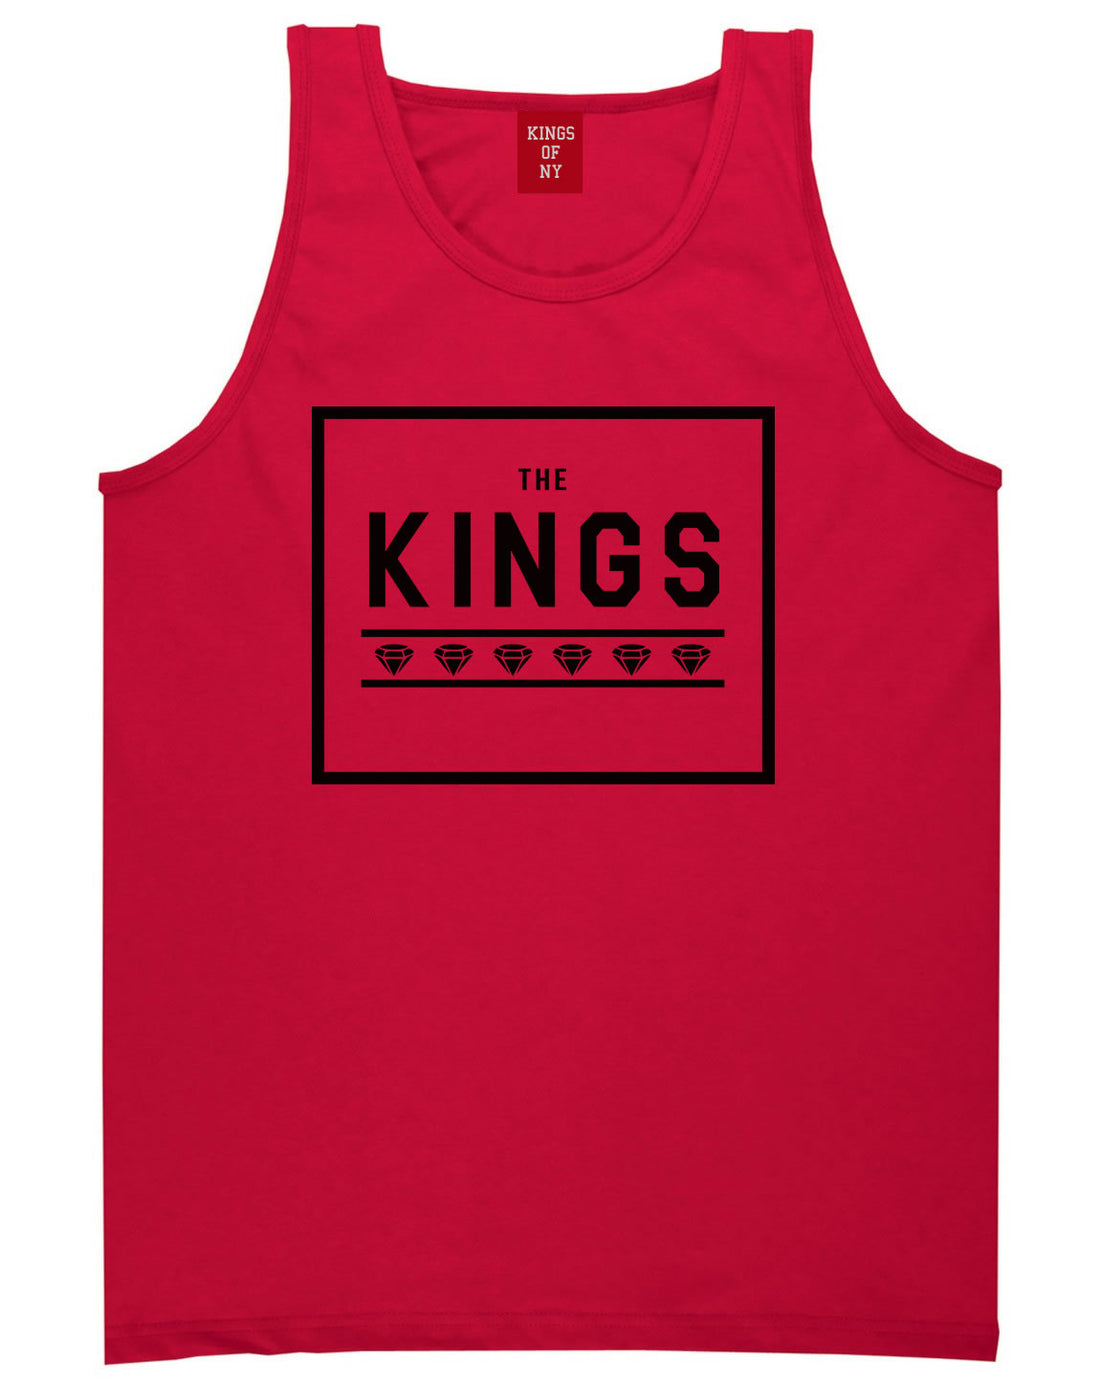 The Kings Diamonds Tank Top in Red by Kings Of NY